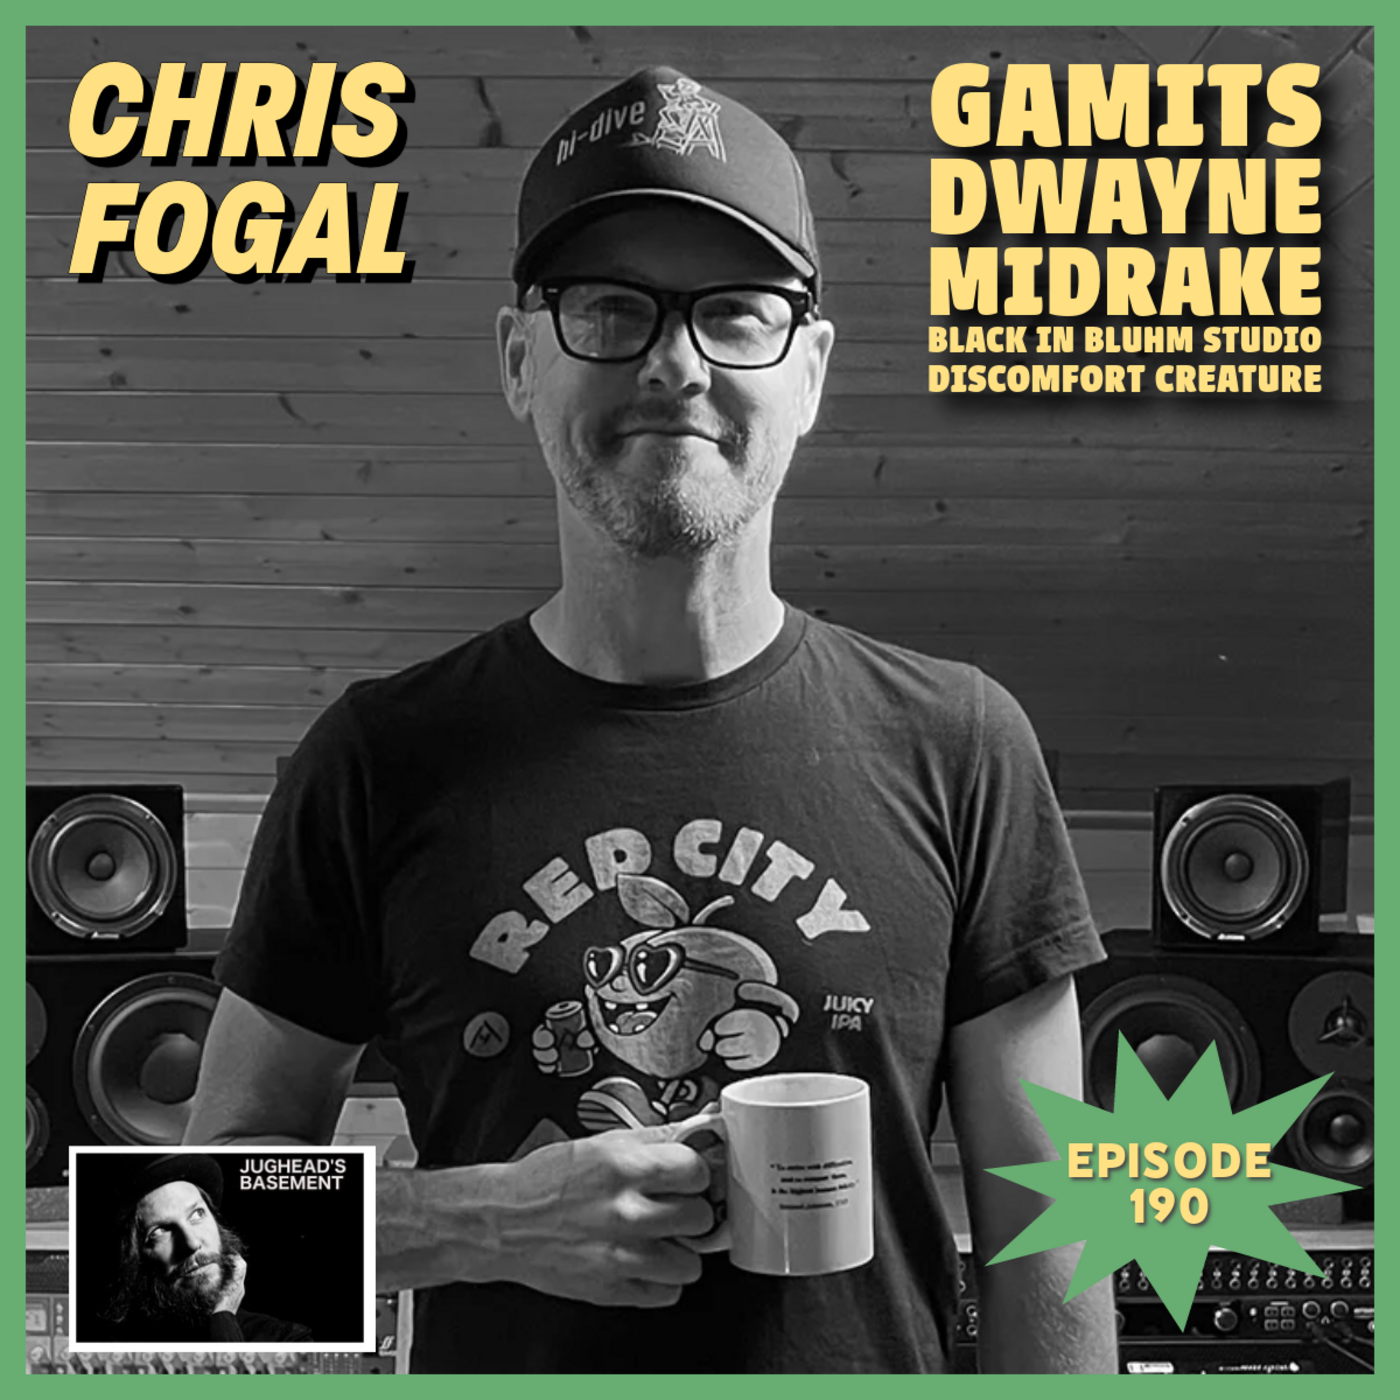 Episode 190: Episode 190: Chris Fogal of The Gamits, Discomfort Creature, Dwayen, and Midrake on LoFi Interviews with HiFi Guests